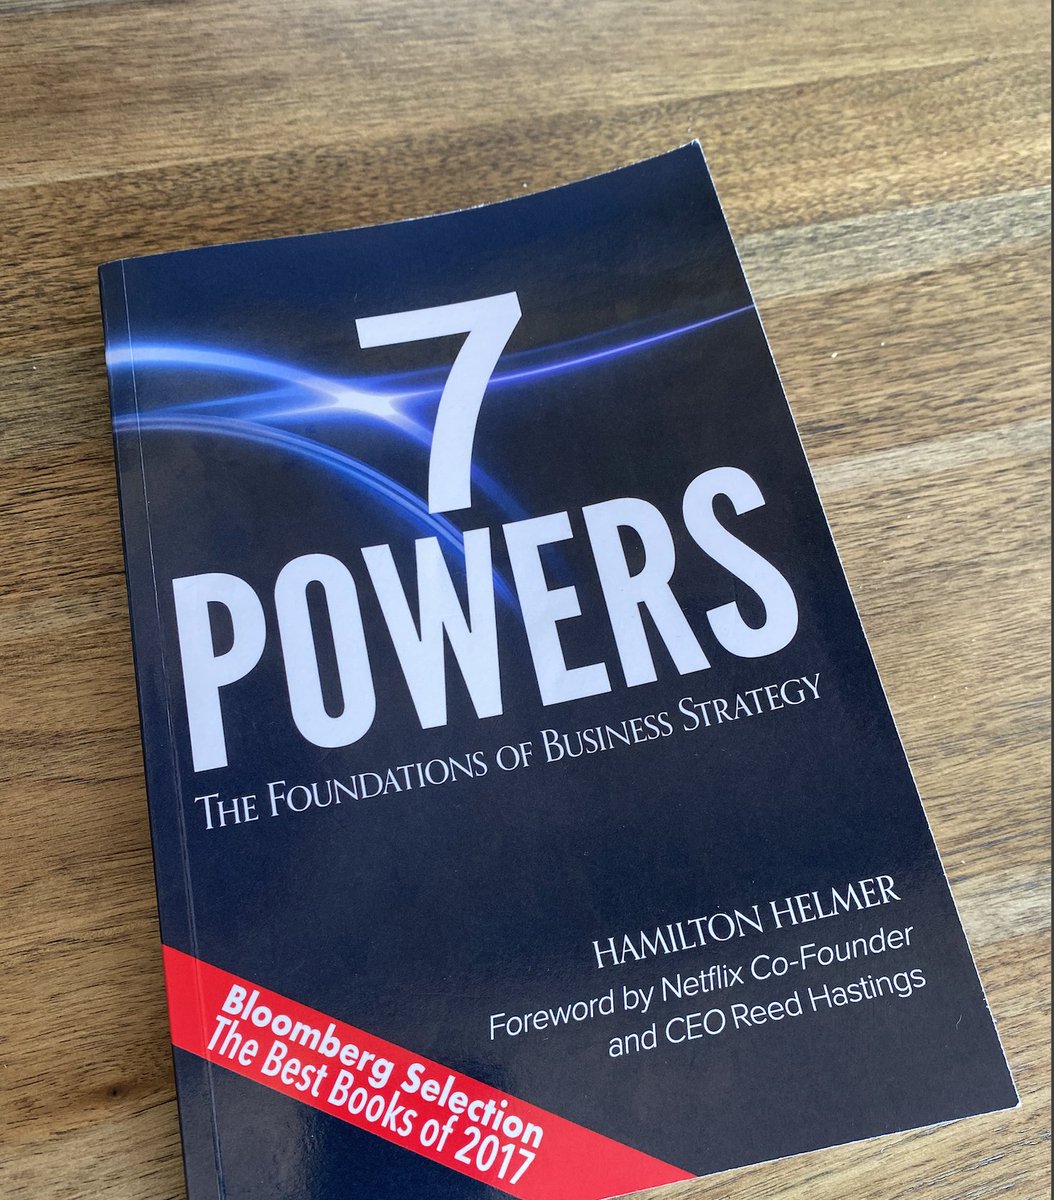 Most strategy books are a waste of time, but 7 Powers by  @hamiltonhelmer gave me a genuinely new mental model for thinking about how to build a moat.Here is a brief summary of Helmer's concepts, and five common ways they are misunderstood by startups: